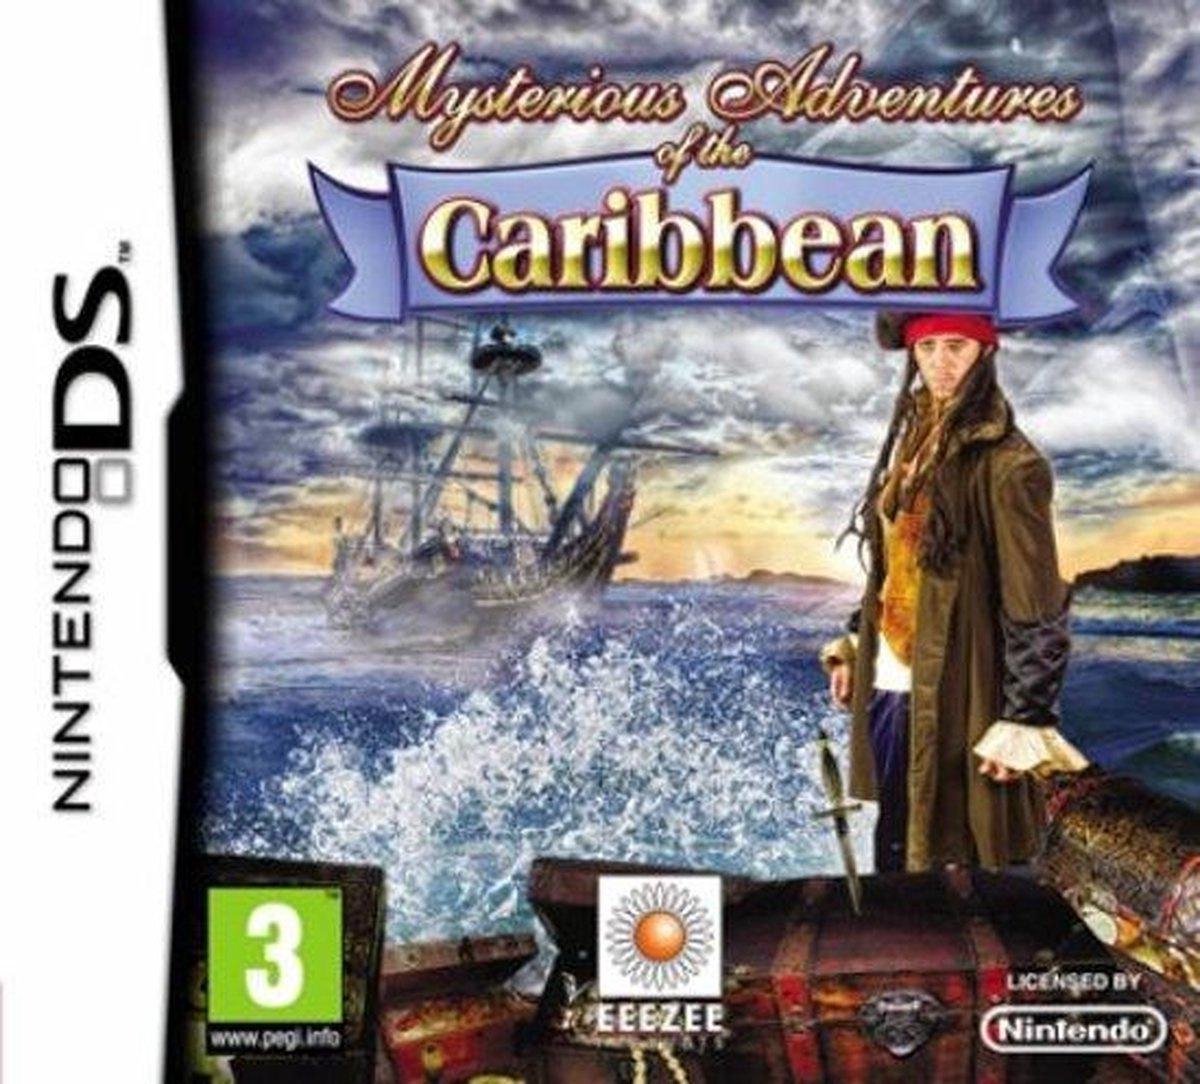 MSL Mysterious Adventures in the Caribbean